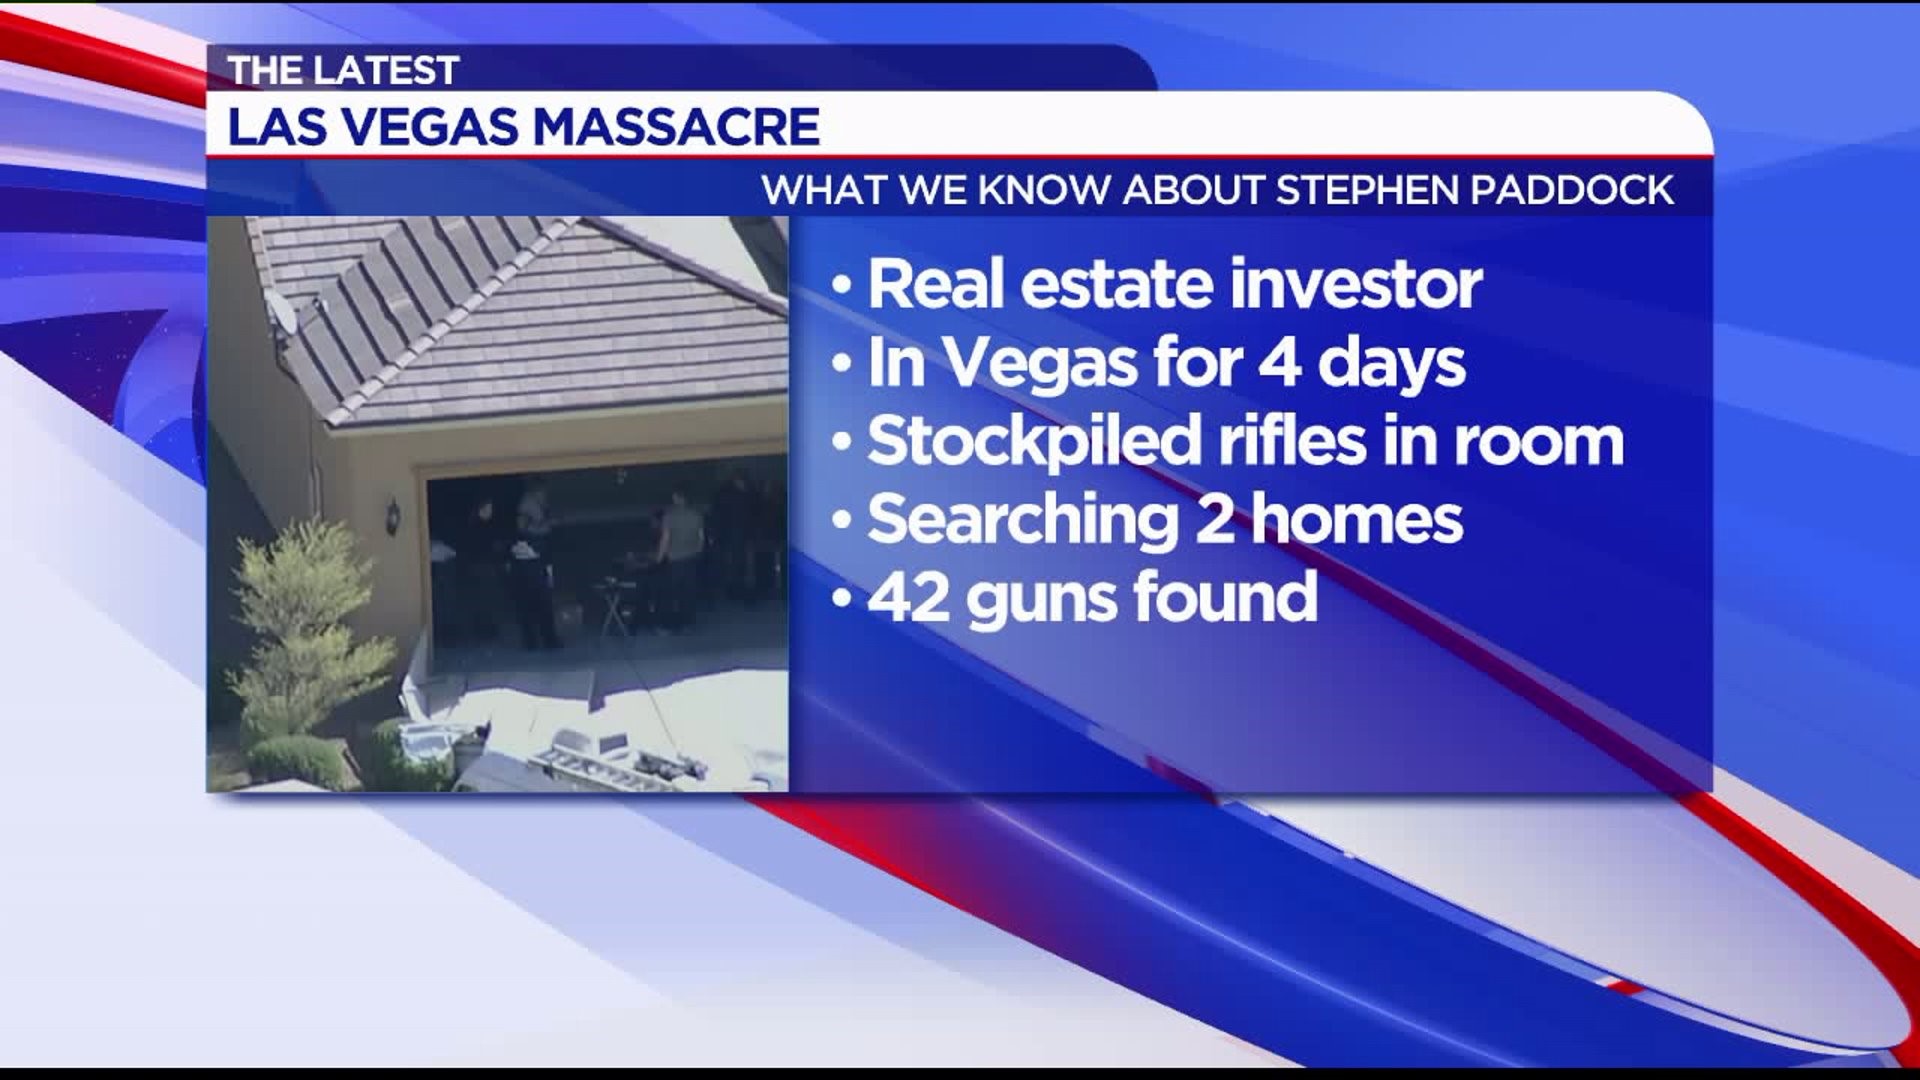 Las Vegas shooting suspect: what we know